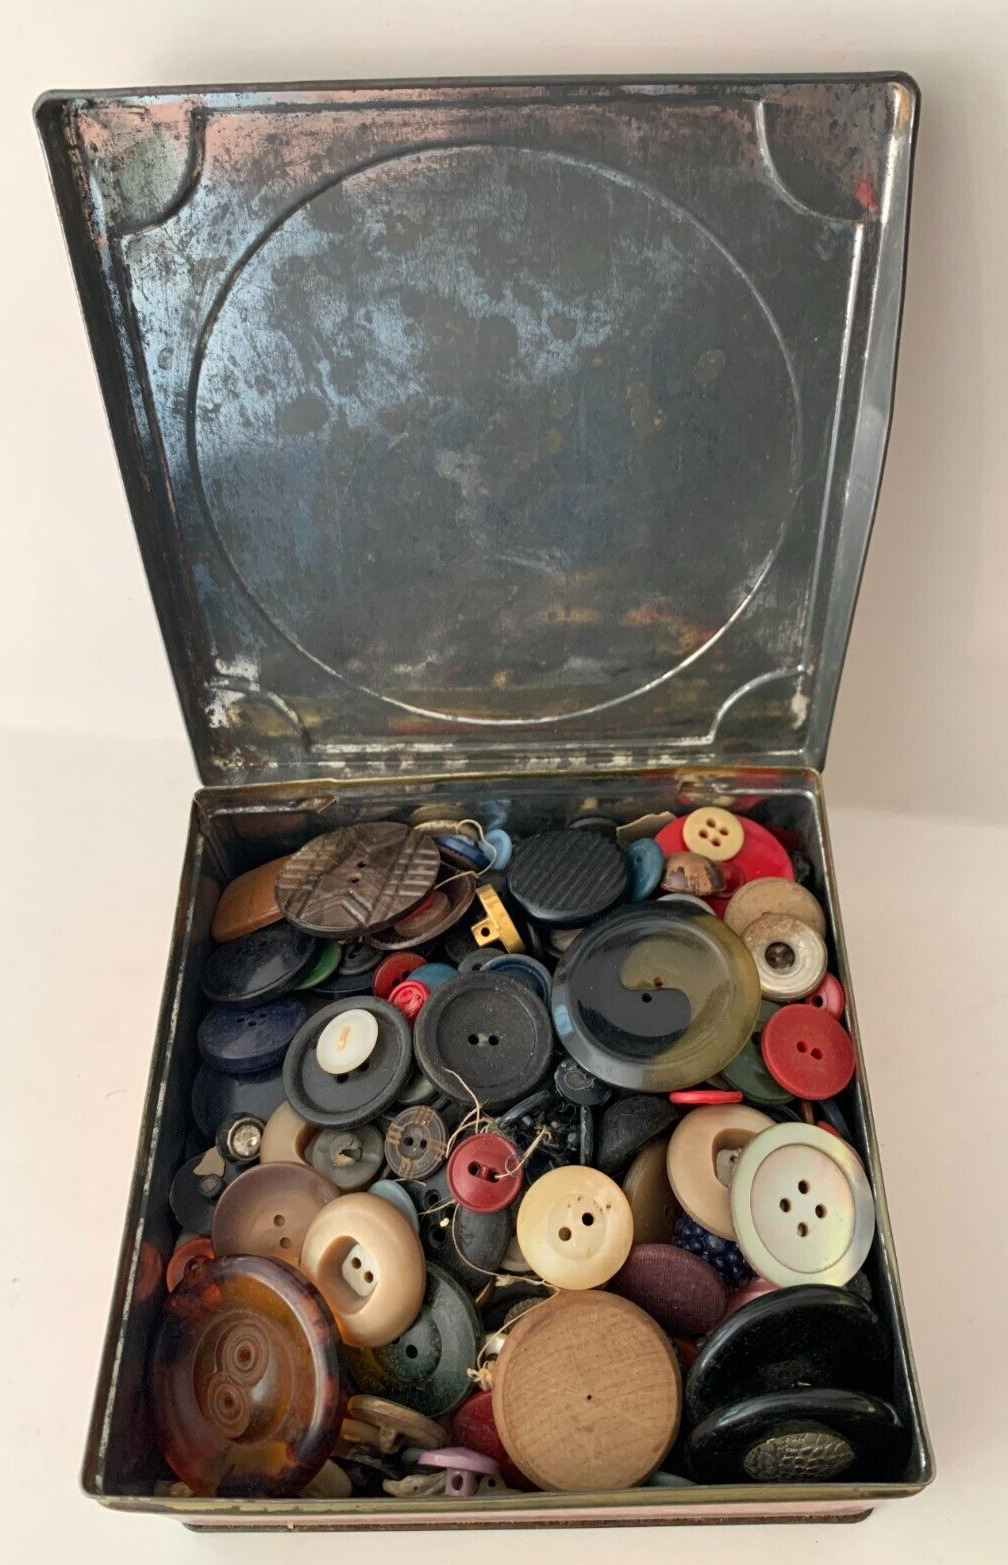 Mixed Lot Hundreds of Old Buttons Sewing Crafts in Vintage Square Tin Button Box